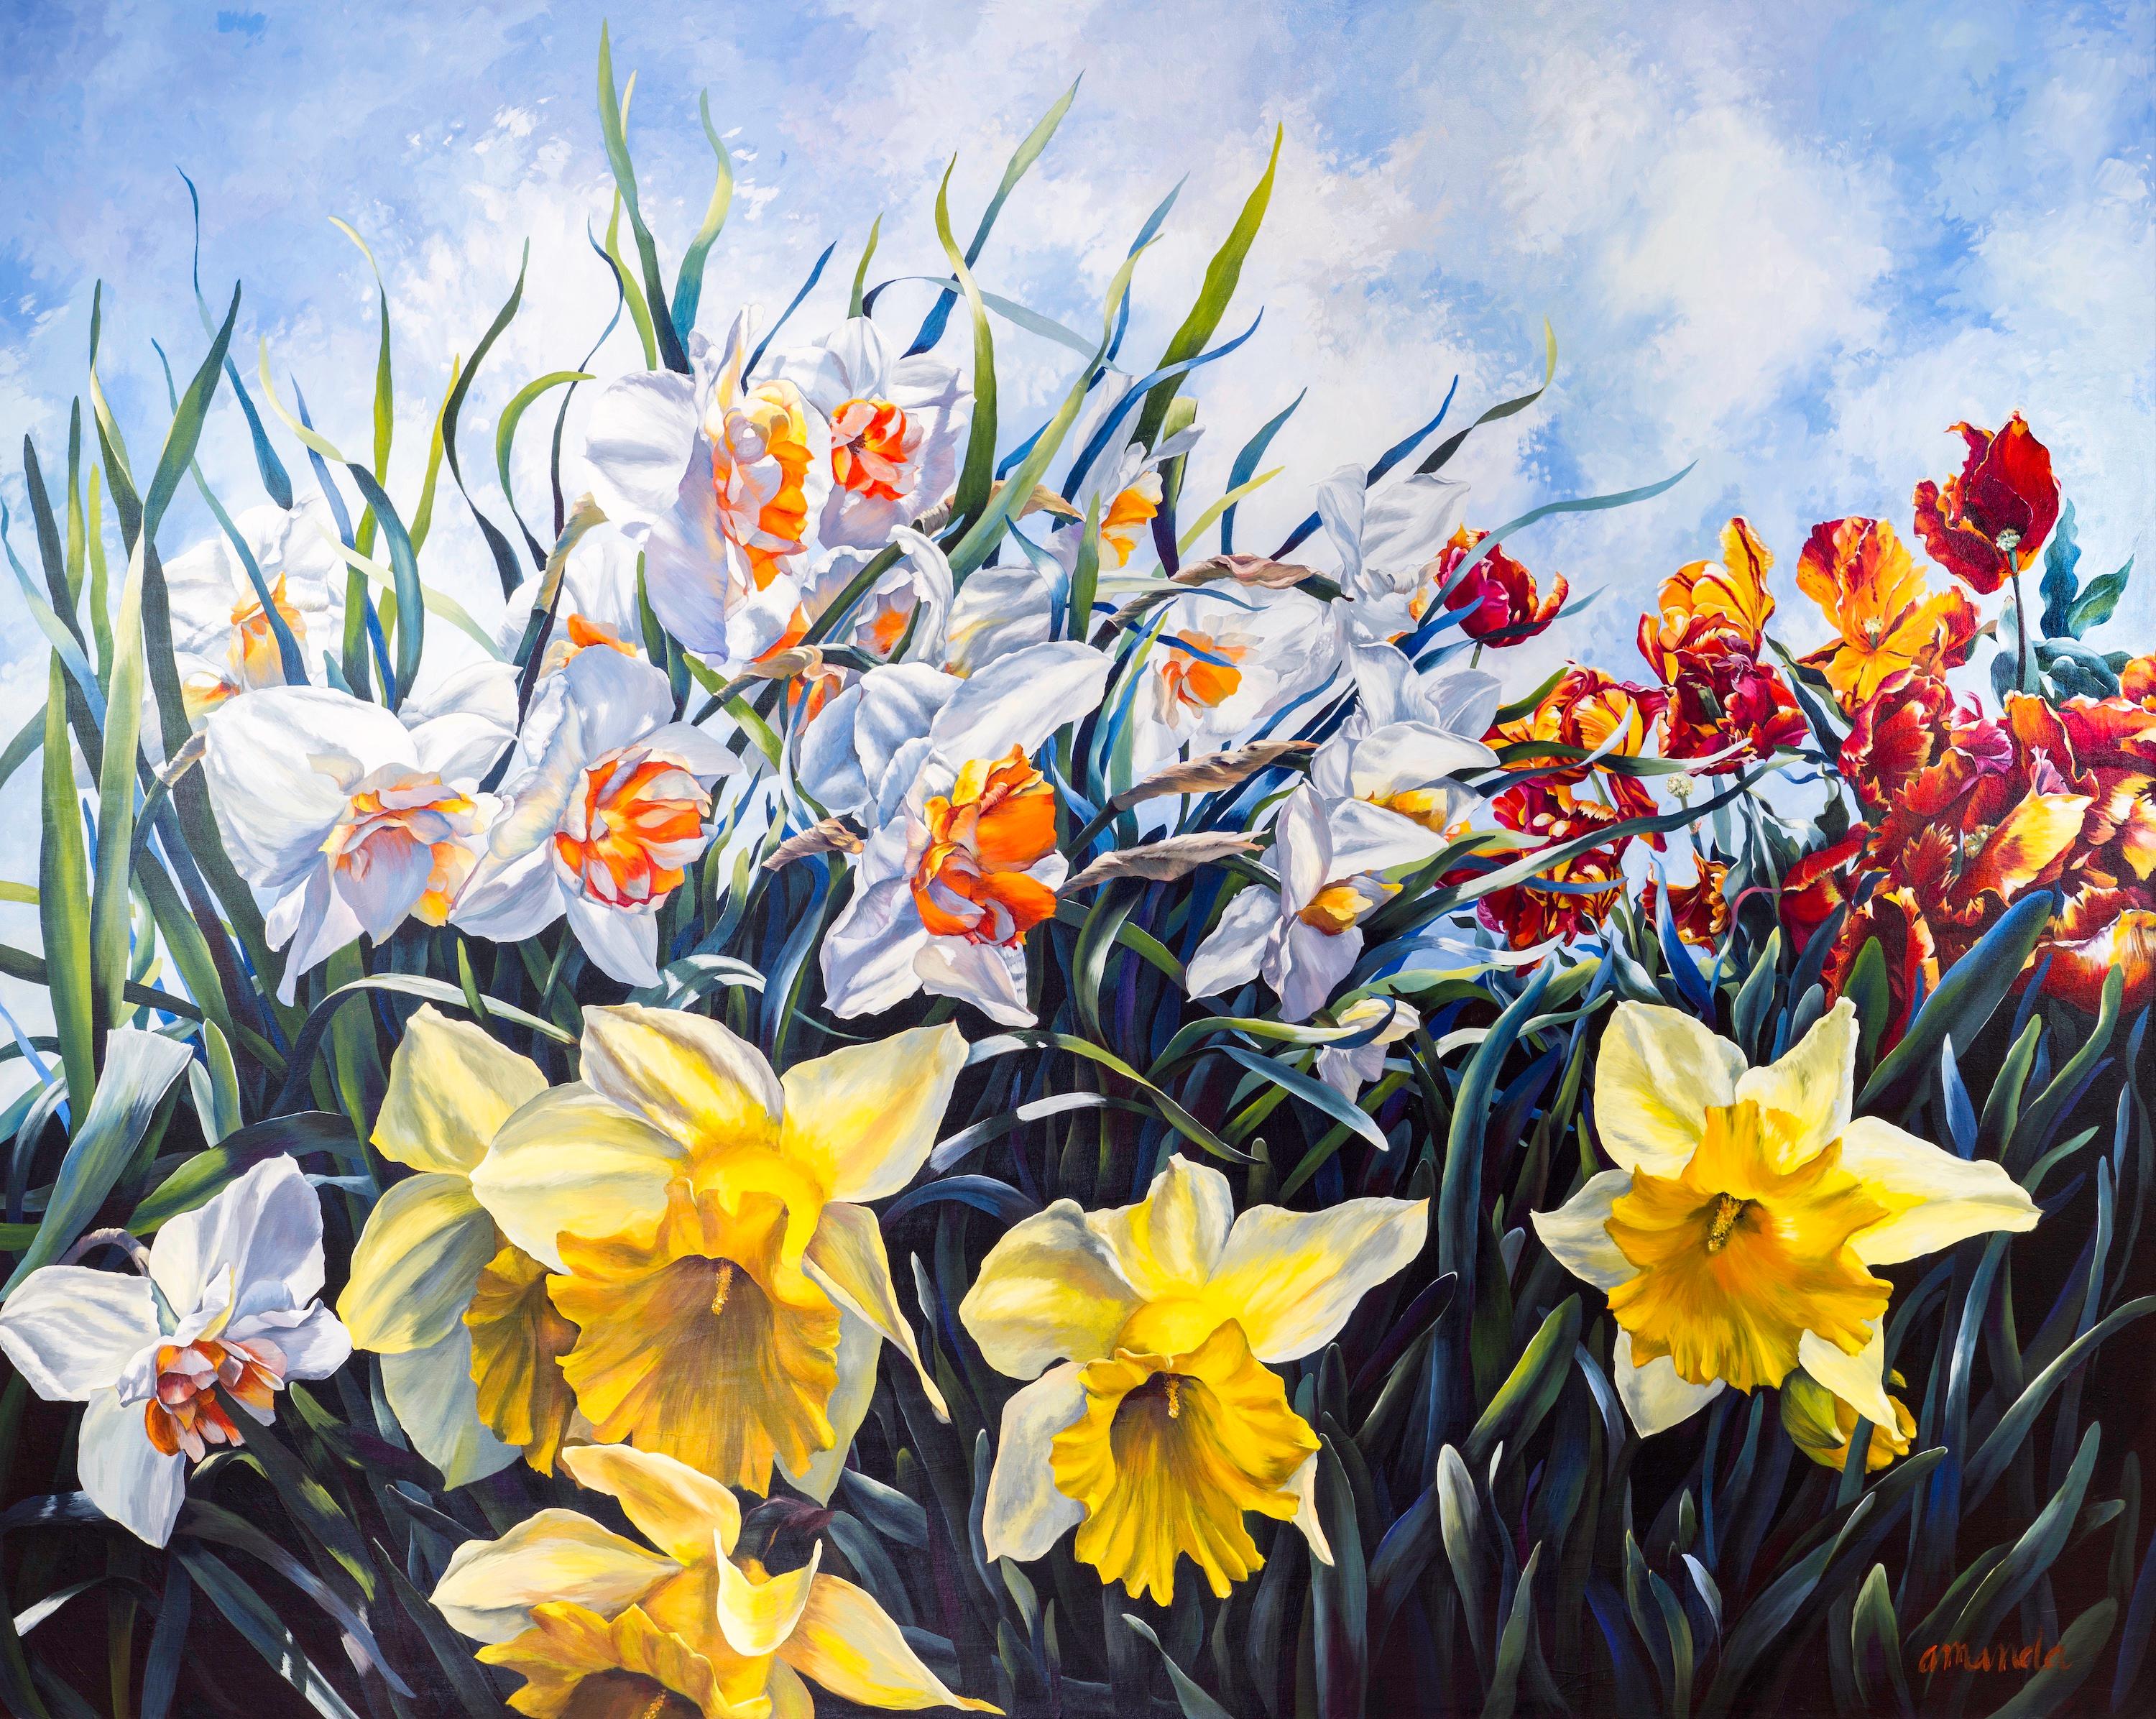 Dancing in the Light - A striking acrylic painting of large Daffodils and tulips